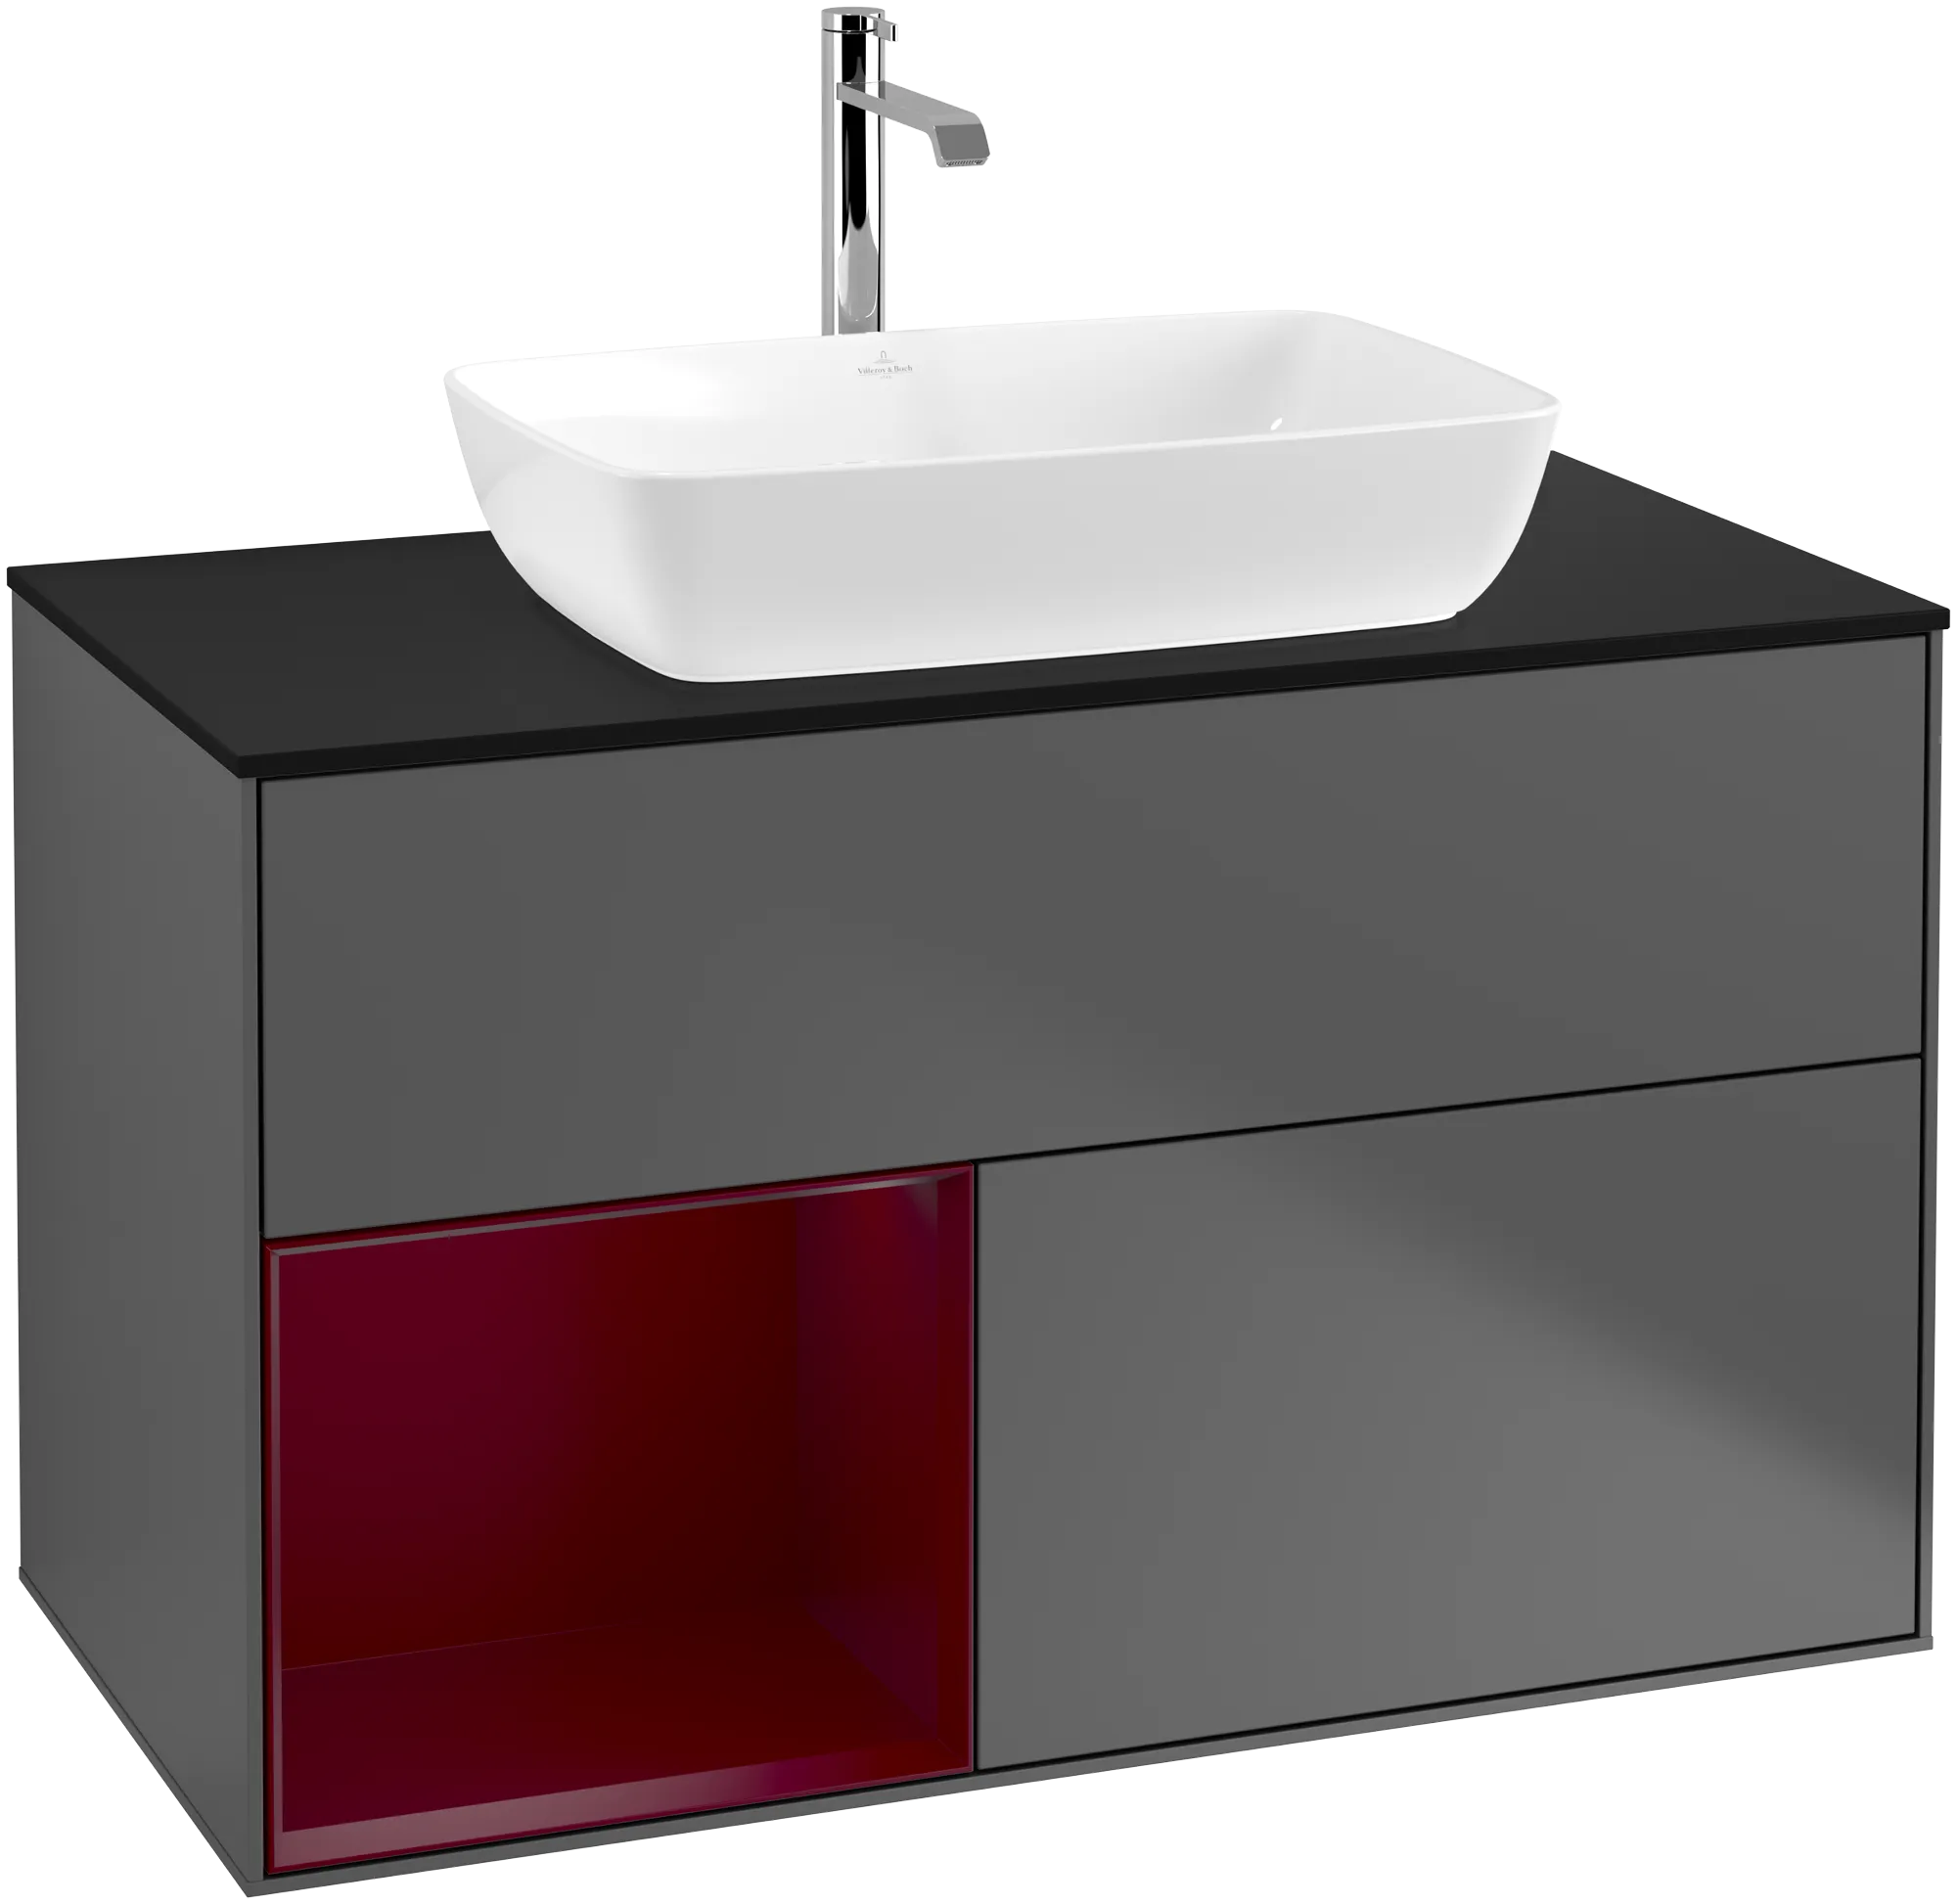 Picture of VILLEROY BOCH Finion Vanity unit, with lighting, 2 pull-out compartments, 1000 x 603 x 501 mm, Anthracite Matt Lacquer / Peony Matt Lacquer / Glass Black Matt #G772HBGK